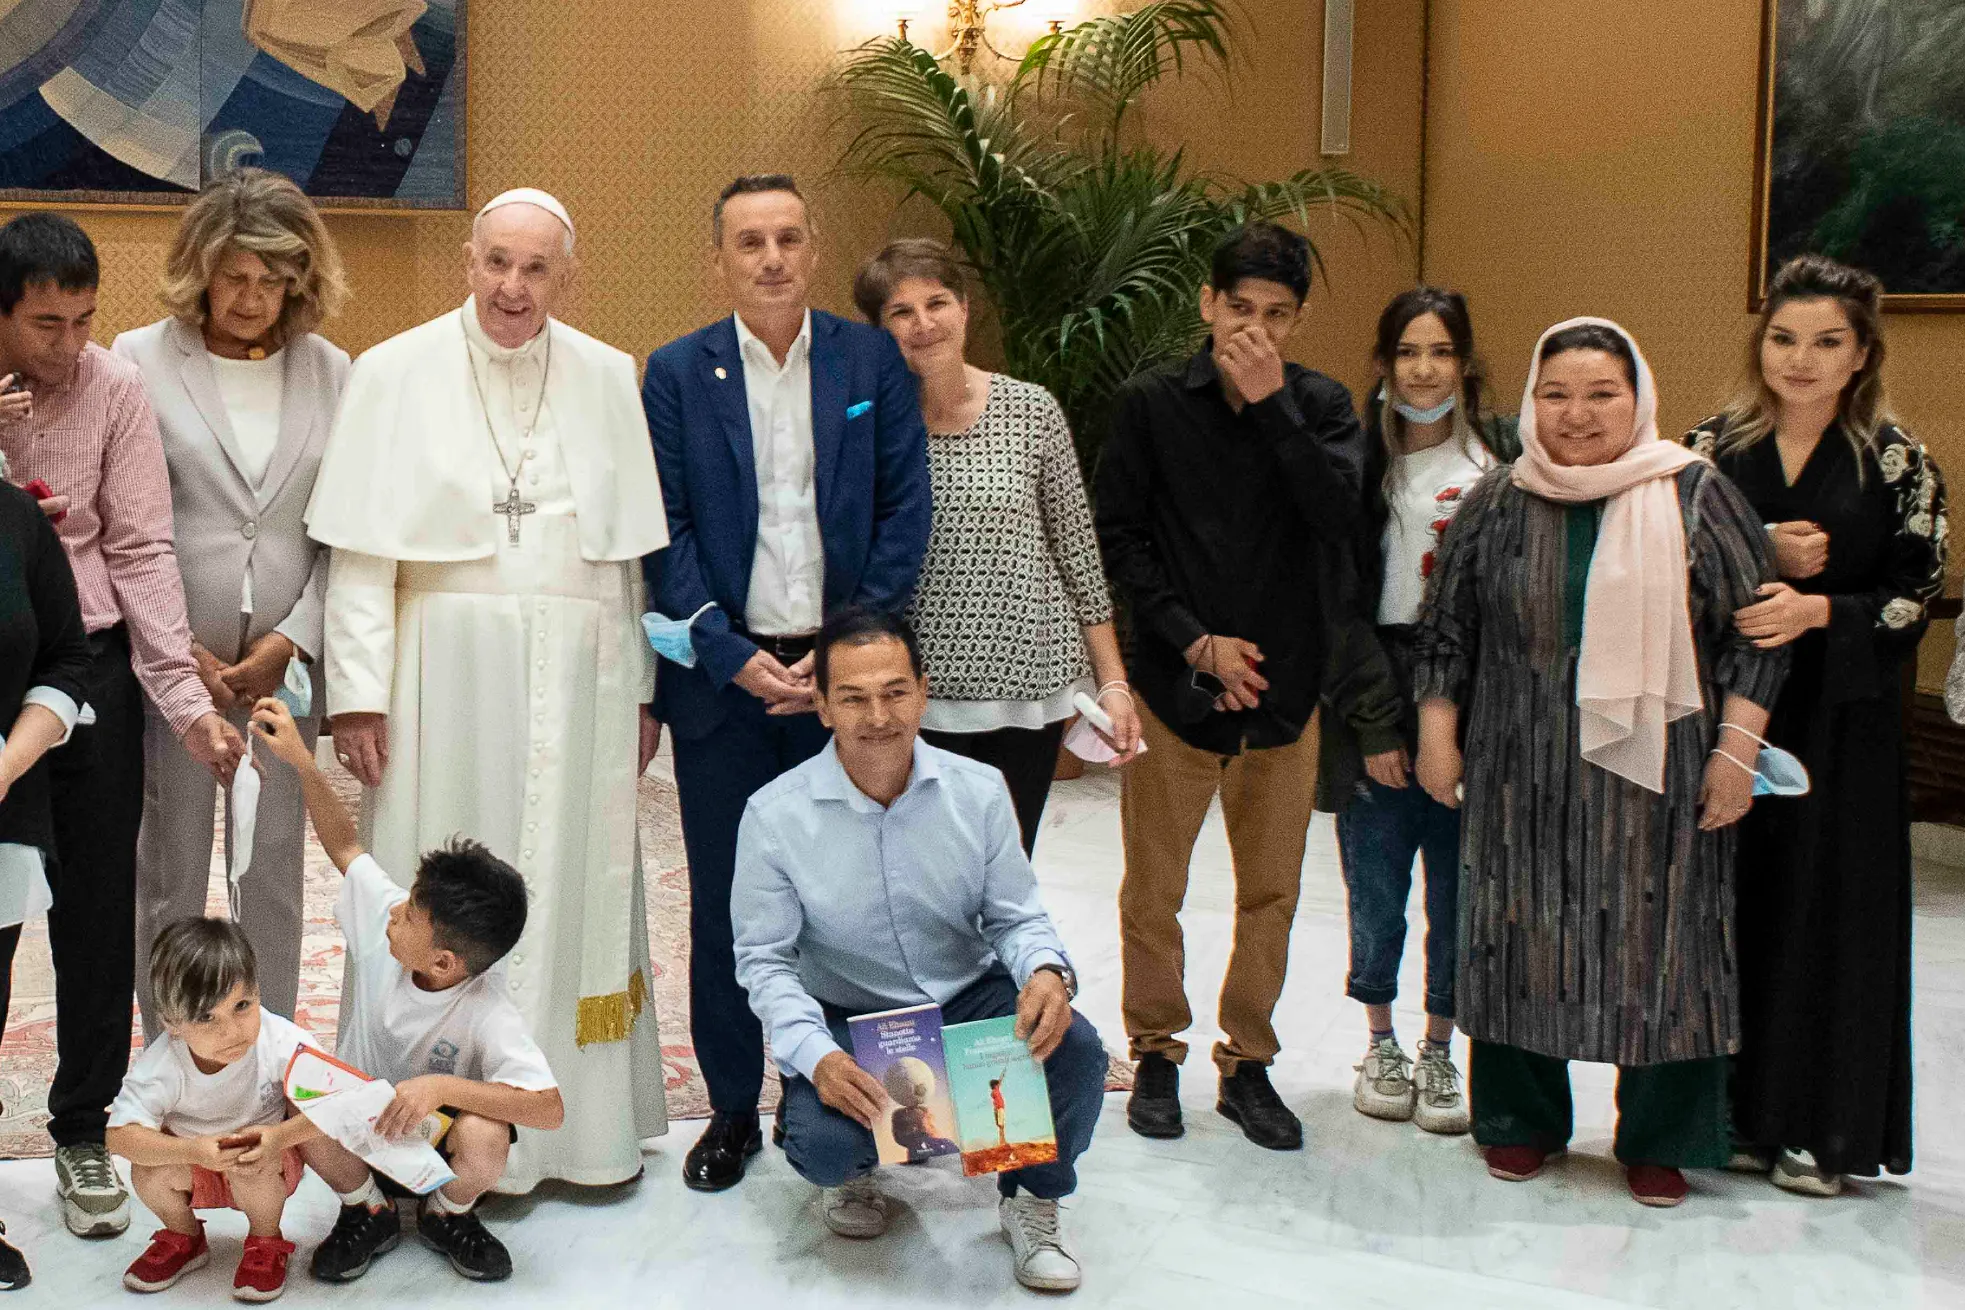 Pope Francis meets with a group of Afghan refugees at the Vatican on Sept. 22, 2021.?w=200&h=150